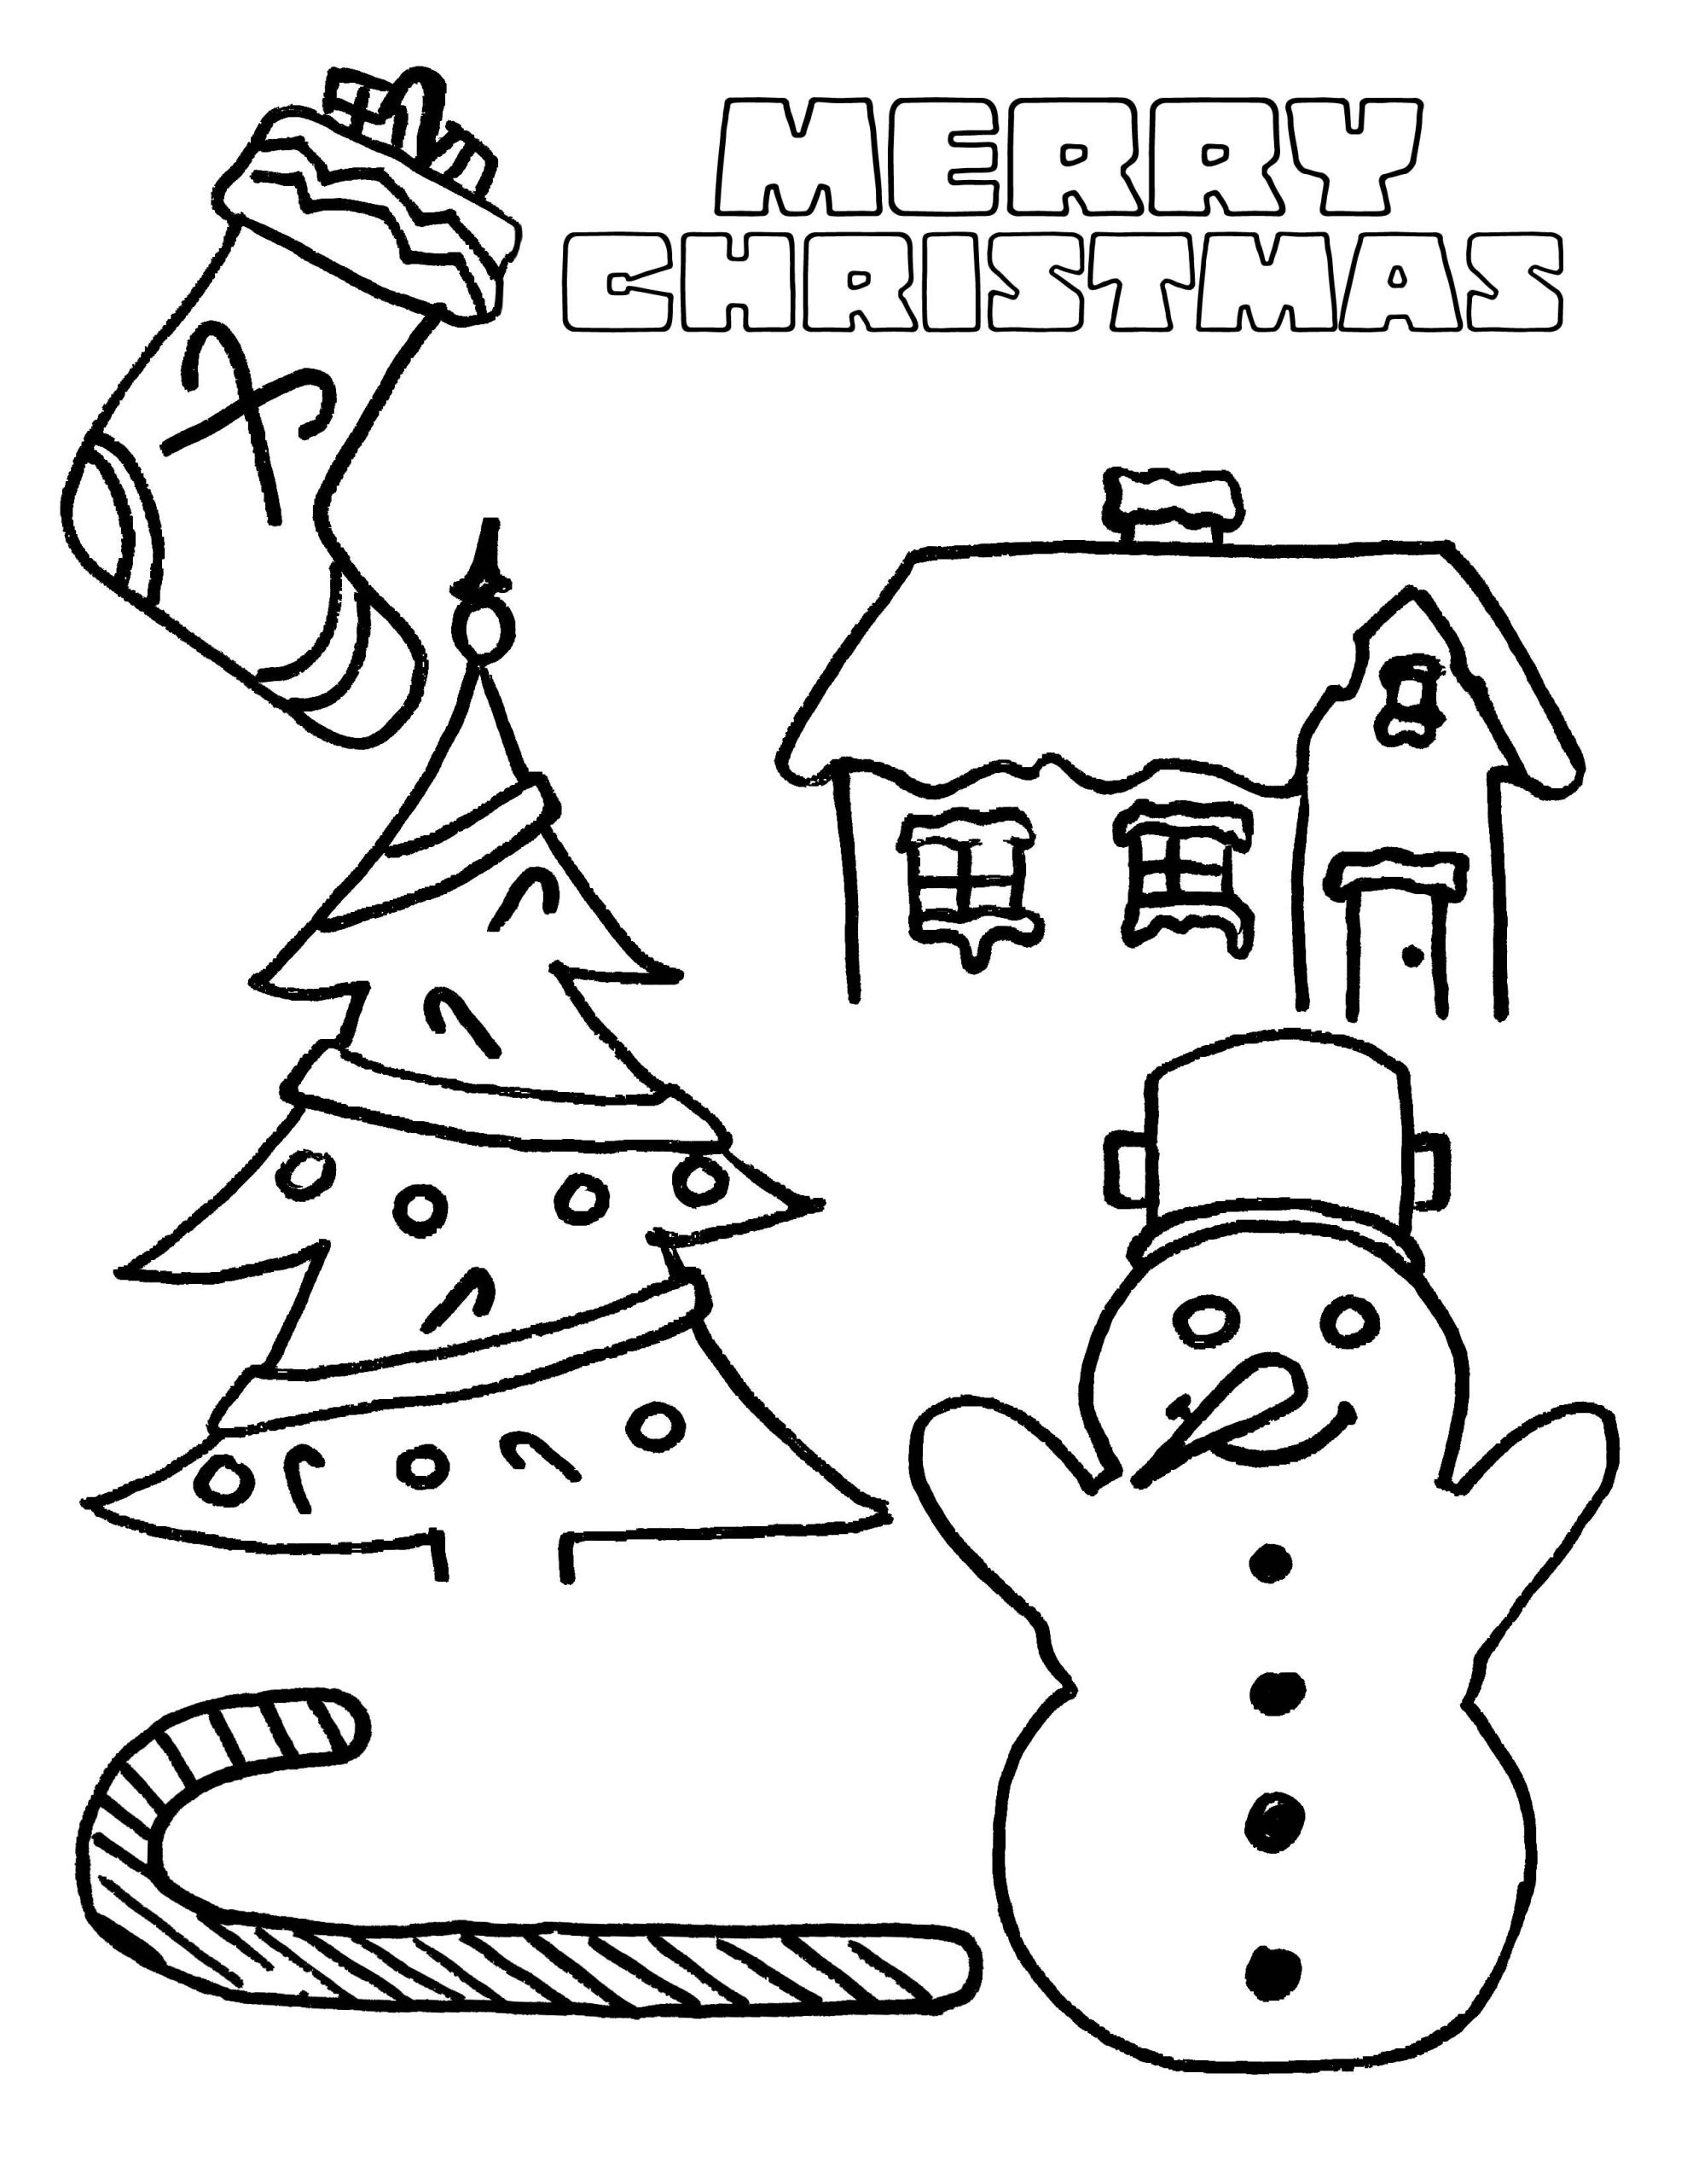 Free Christmas Coloring Pages For Kids
 Party Simplicity free Christmas coloring page for kids